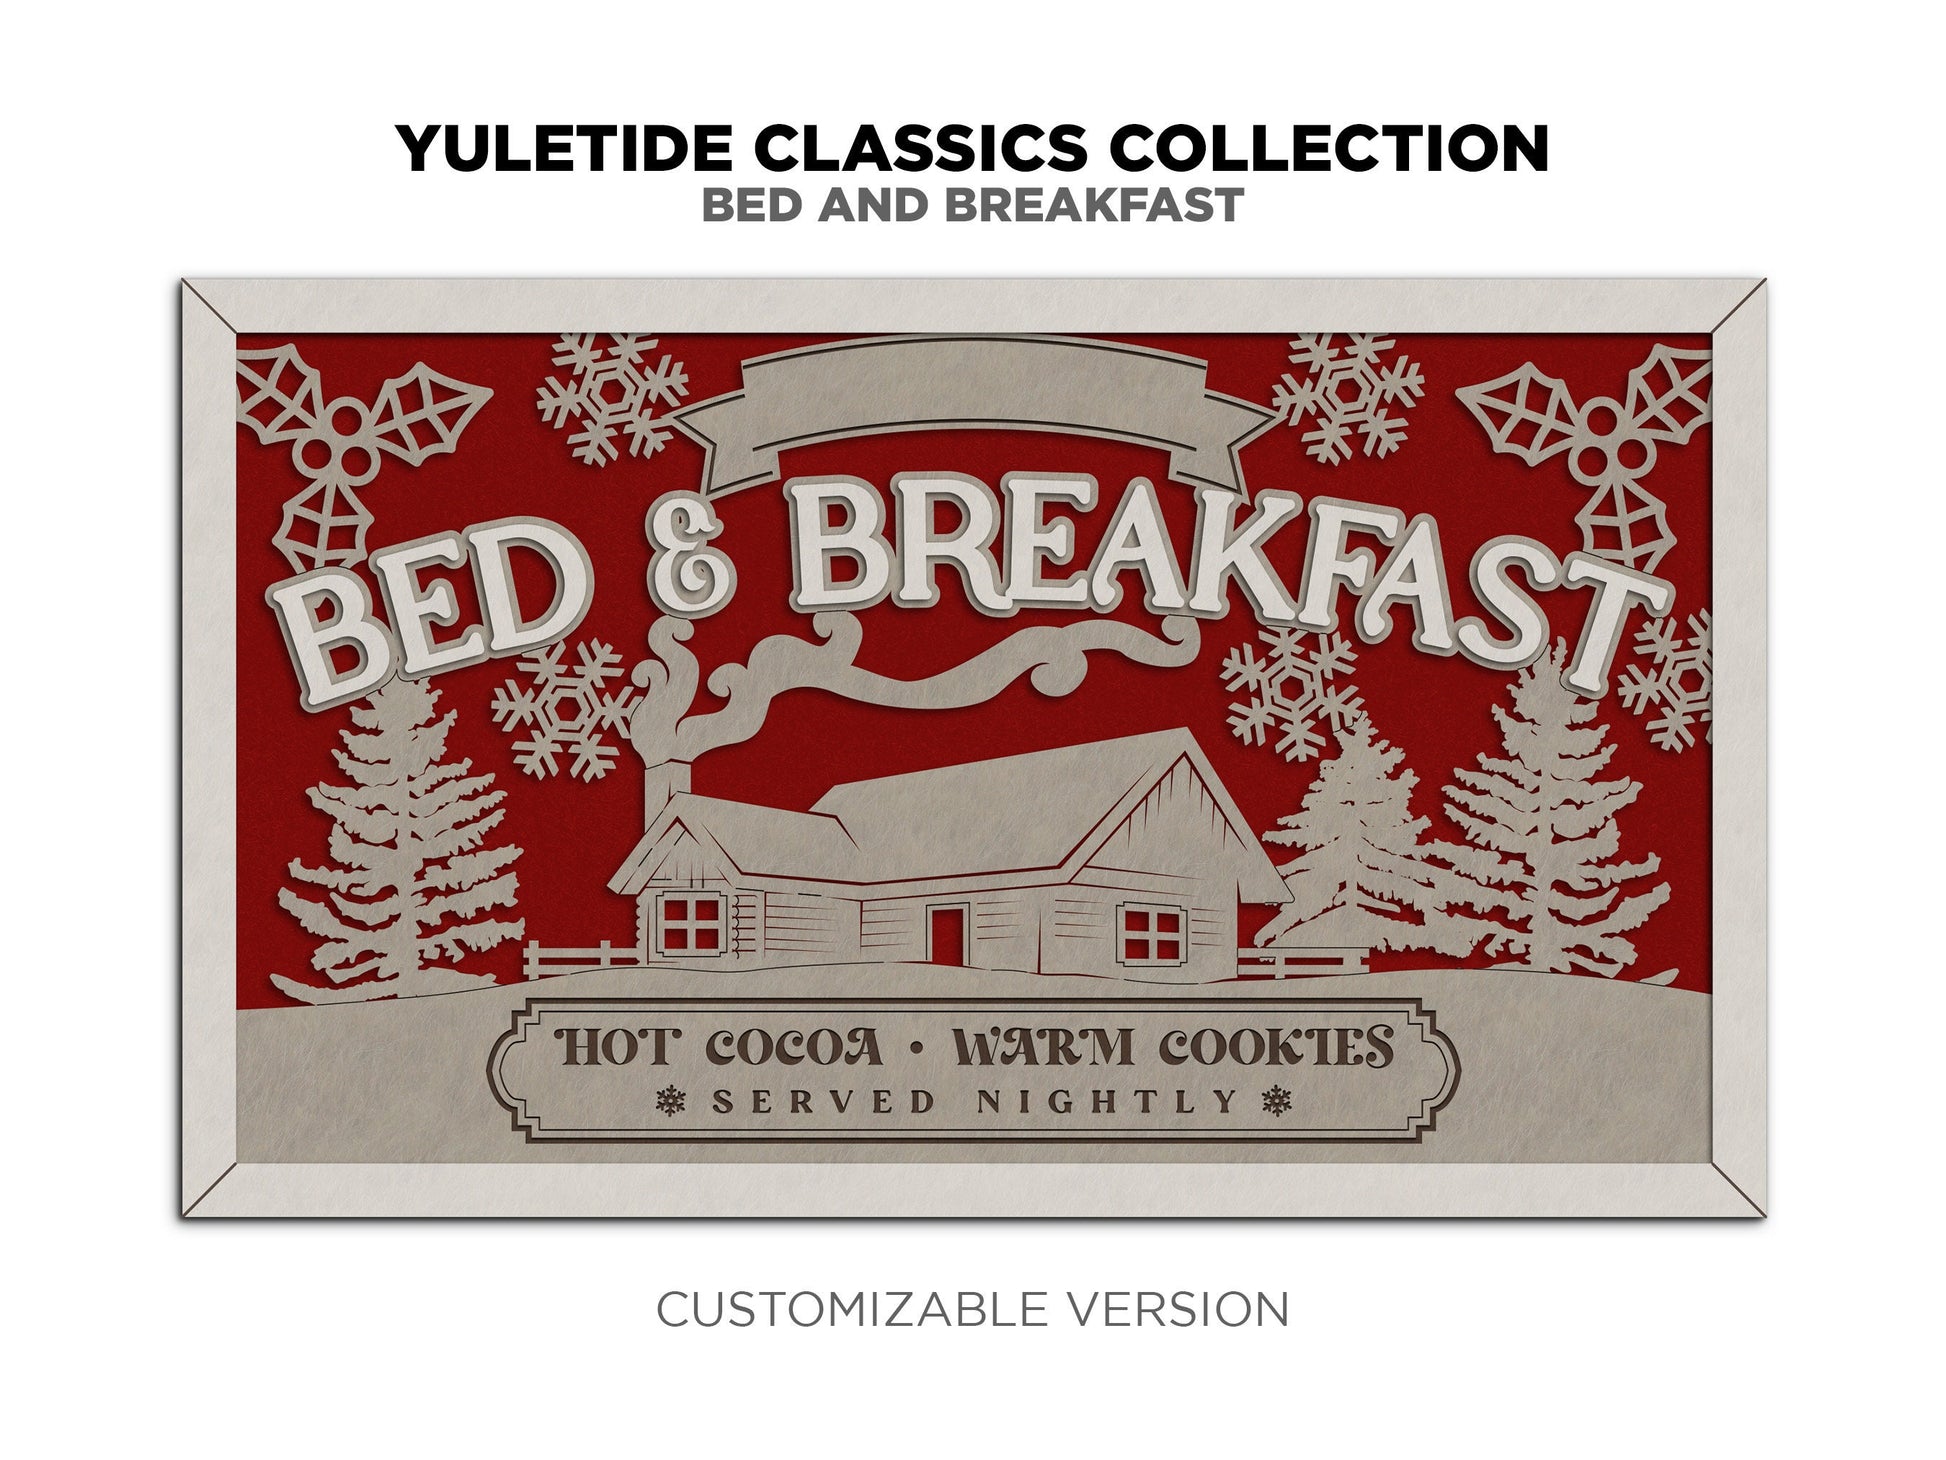 Bed and Breakfast - Yuletide Classic Signage - Includes 1 Customizable and Non Customizable Sign - Tested on Glowforge & Lightburn